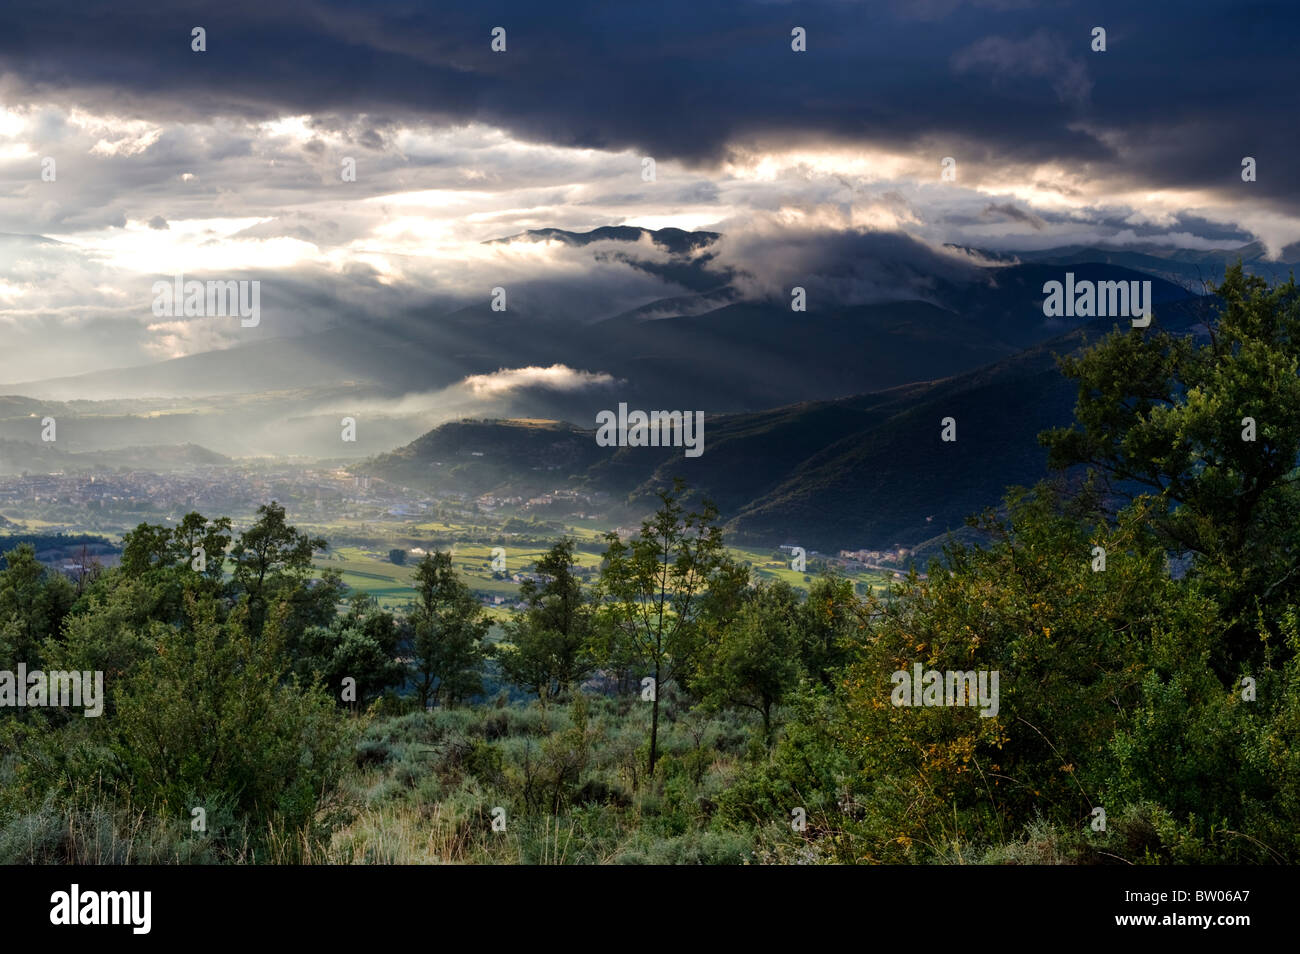 View from the village of Ortedo towards the town of La Seu d'Urgell, in the Pyrenees of Catalonia, Spain, after a thunderstorm Stock Photo